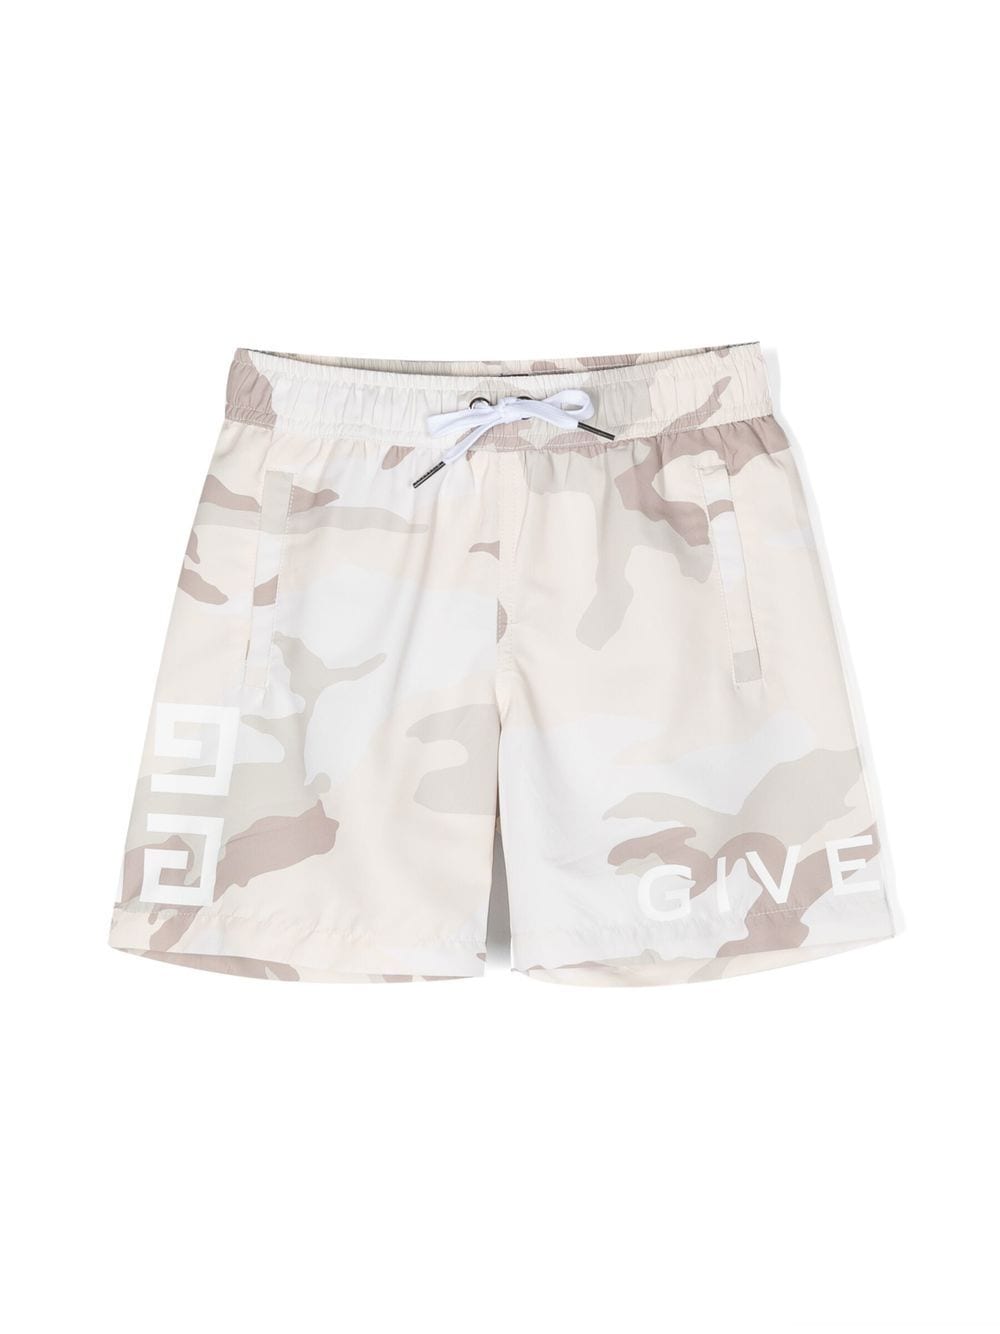 Givenchy Kids Badeshorts mit Camouflage-Print - Nude von Givenchy Kids